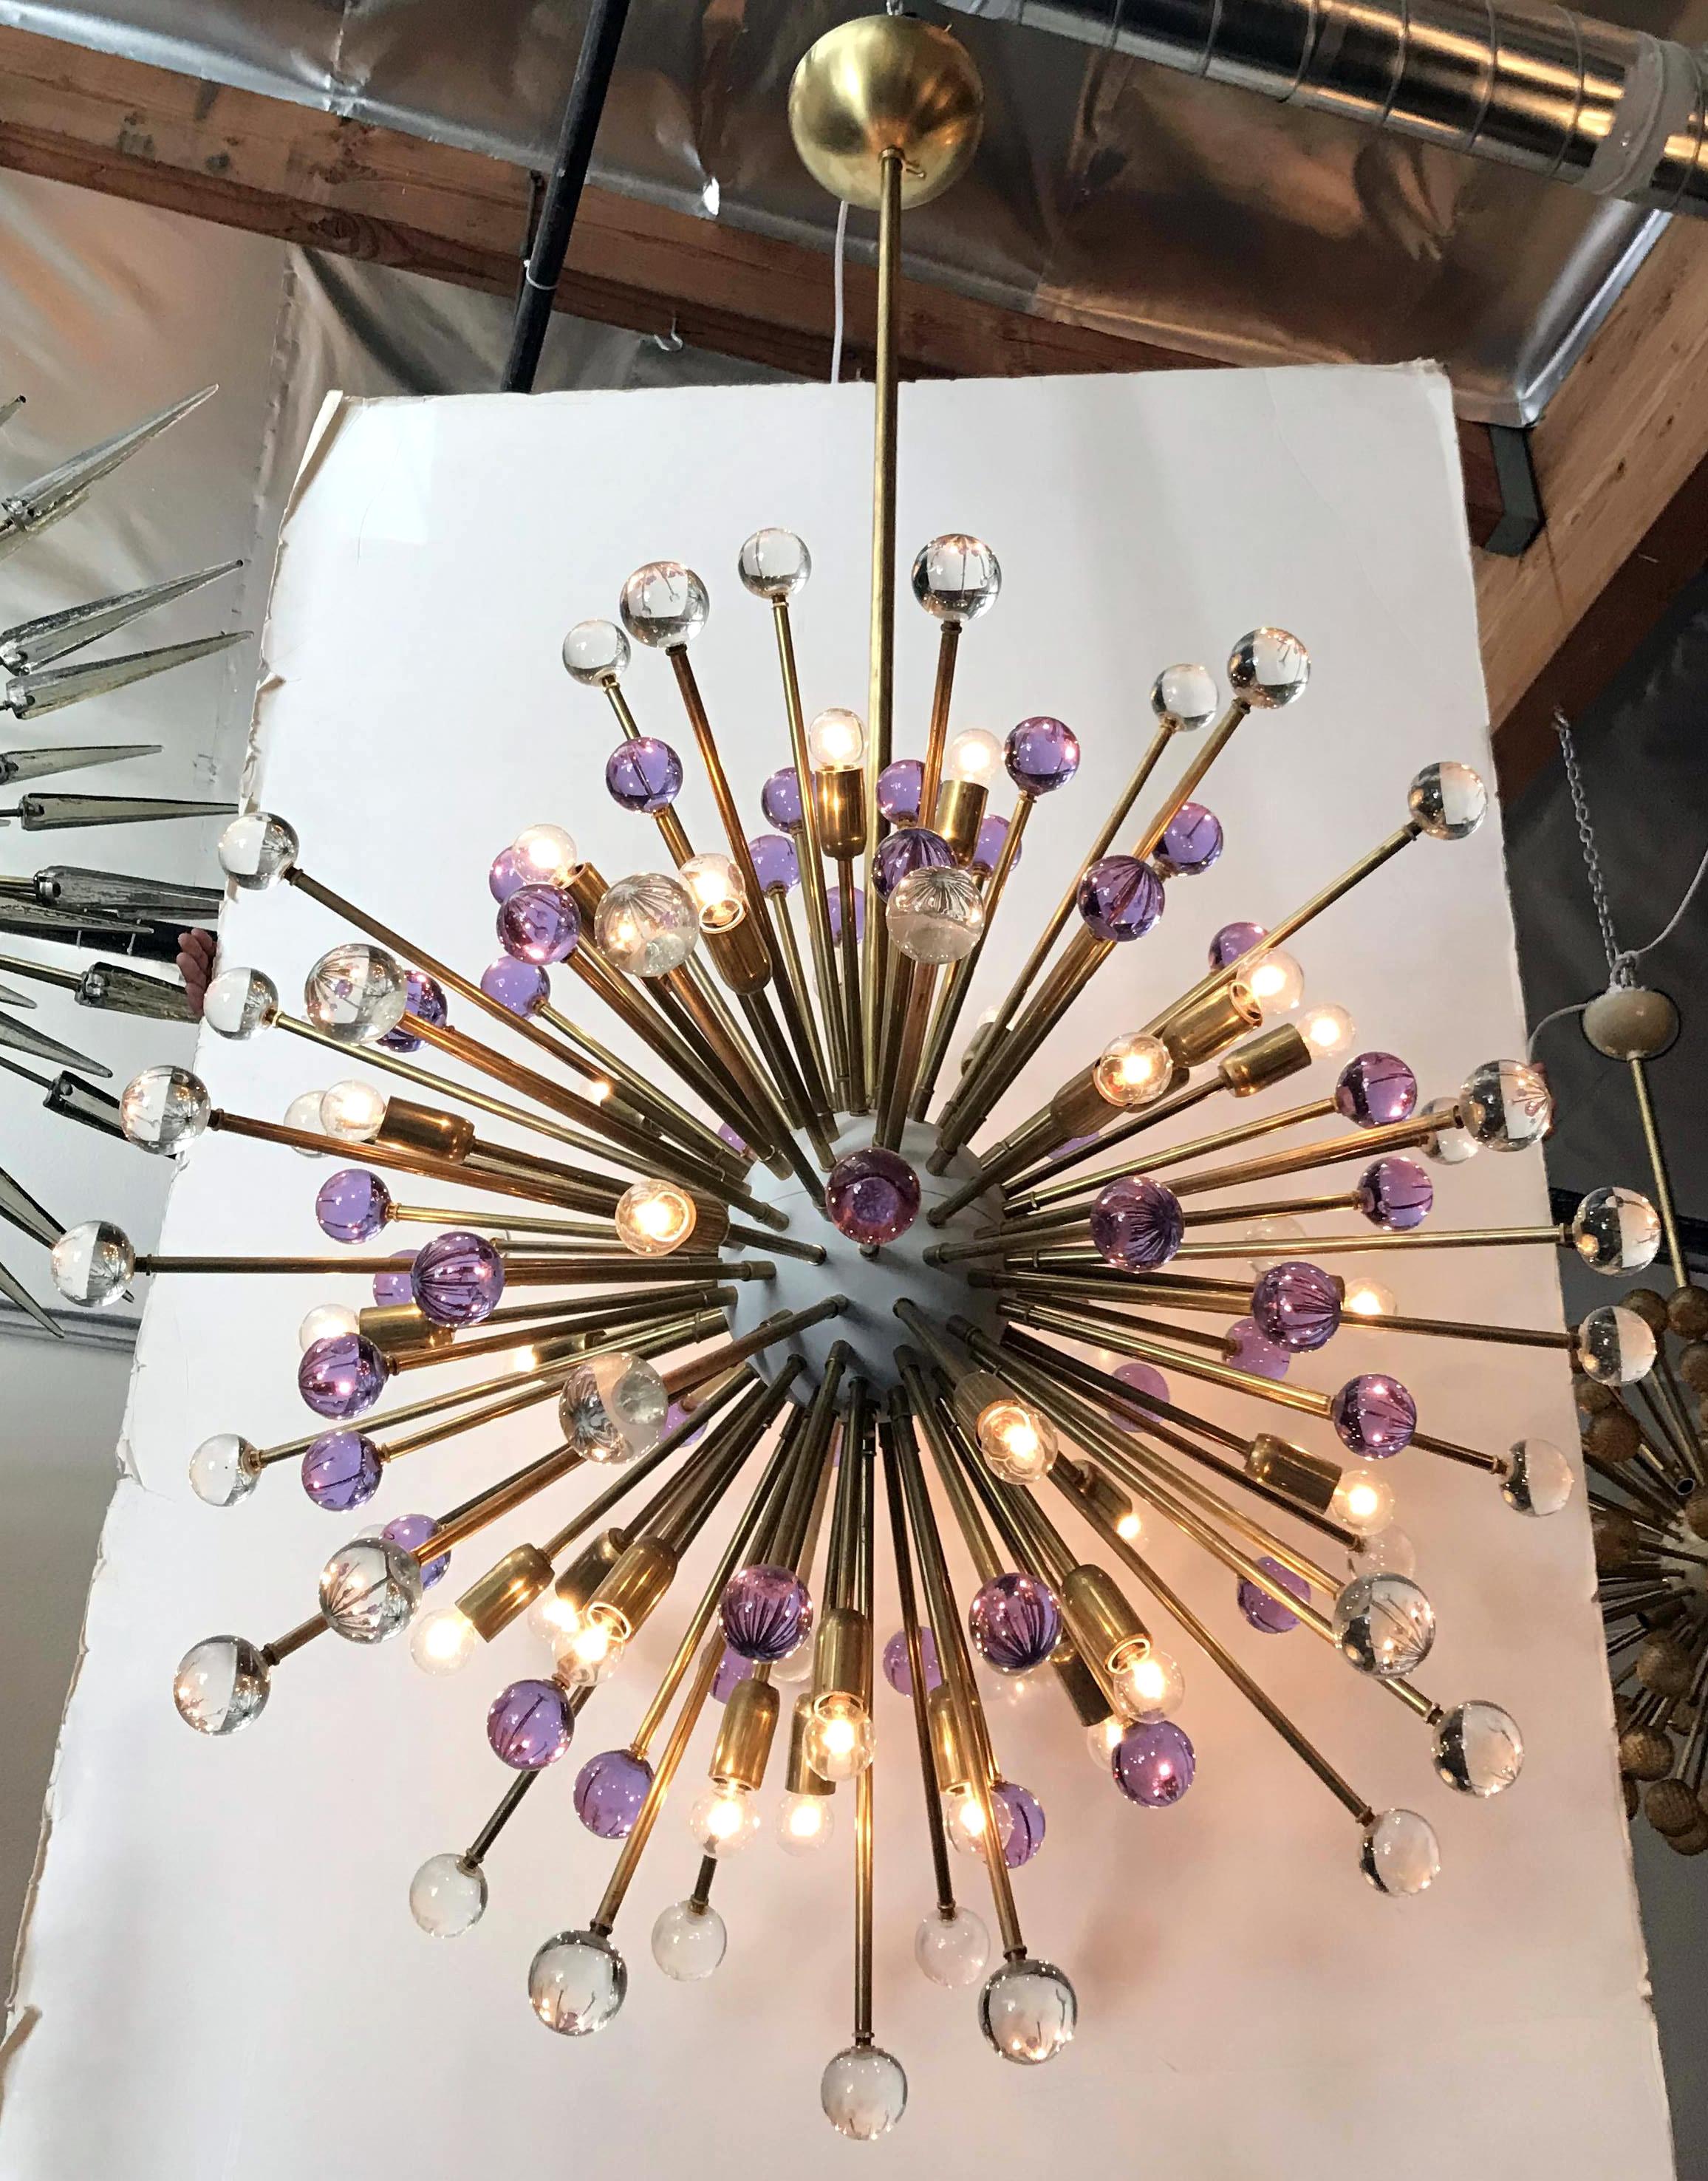 Italian modern Sputnik chandelier with hand blown clear and purple Murano glass spheres, mounted on natural brass frames with white enameled centre / Designed by Fabio Bergomi for Fabio Ltd / Made in Italy
30 lights / E12 or E14 type / max 40 W